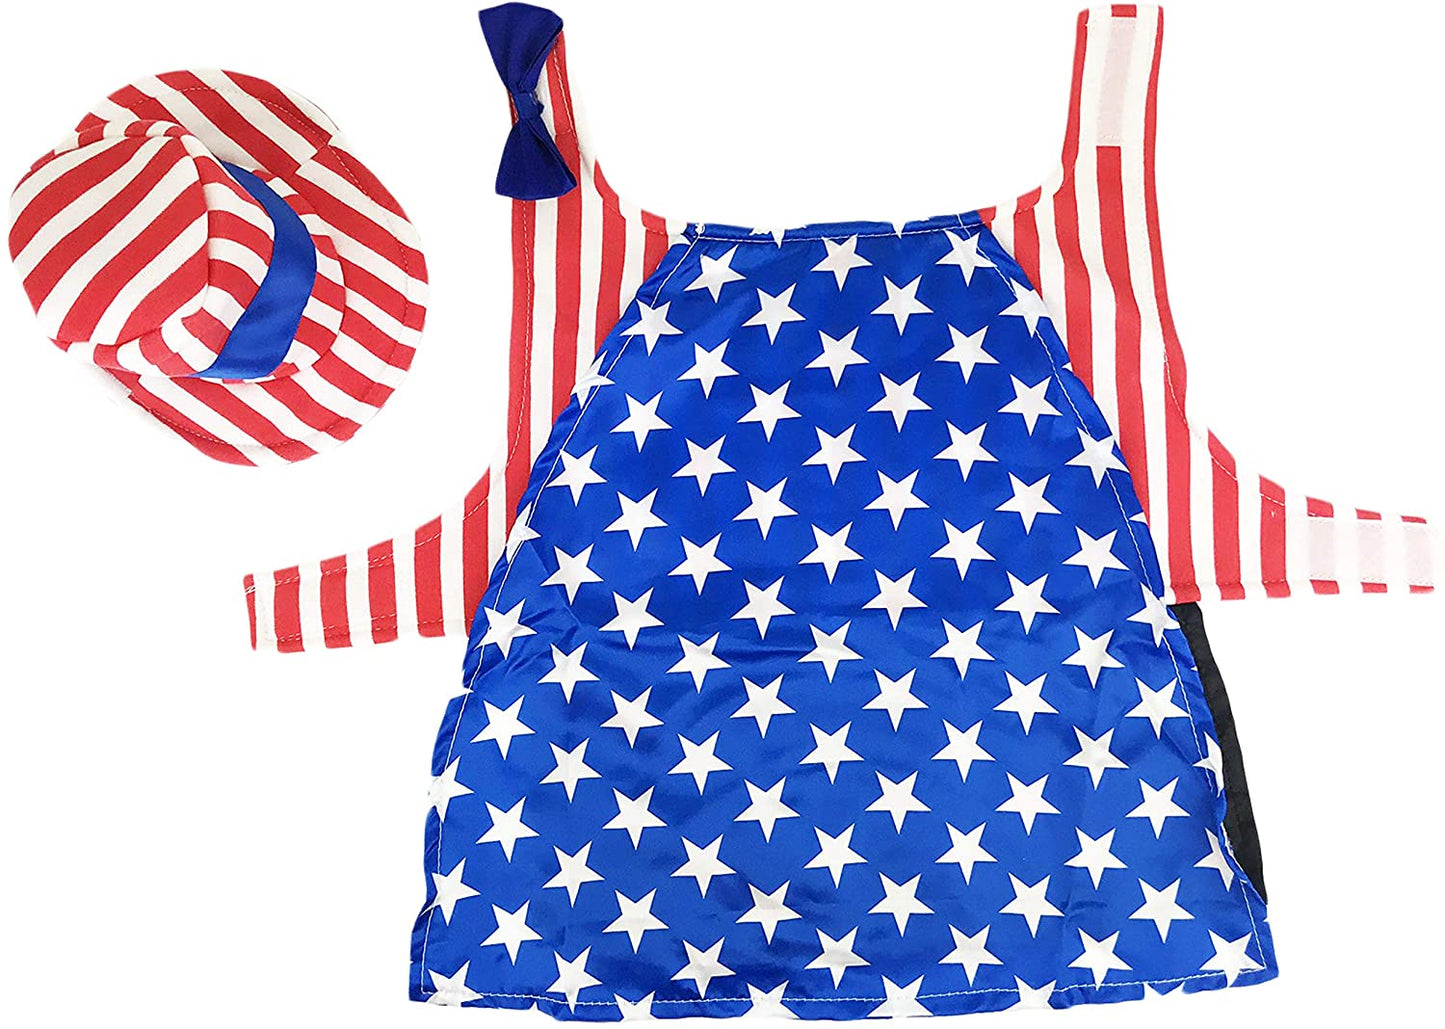 Midlee 4th of July Outfit for Small Dogs